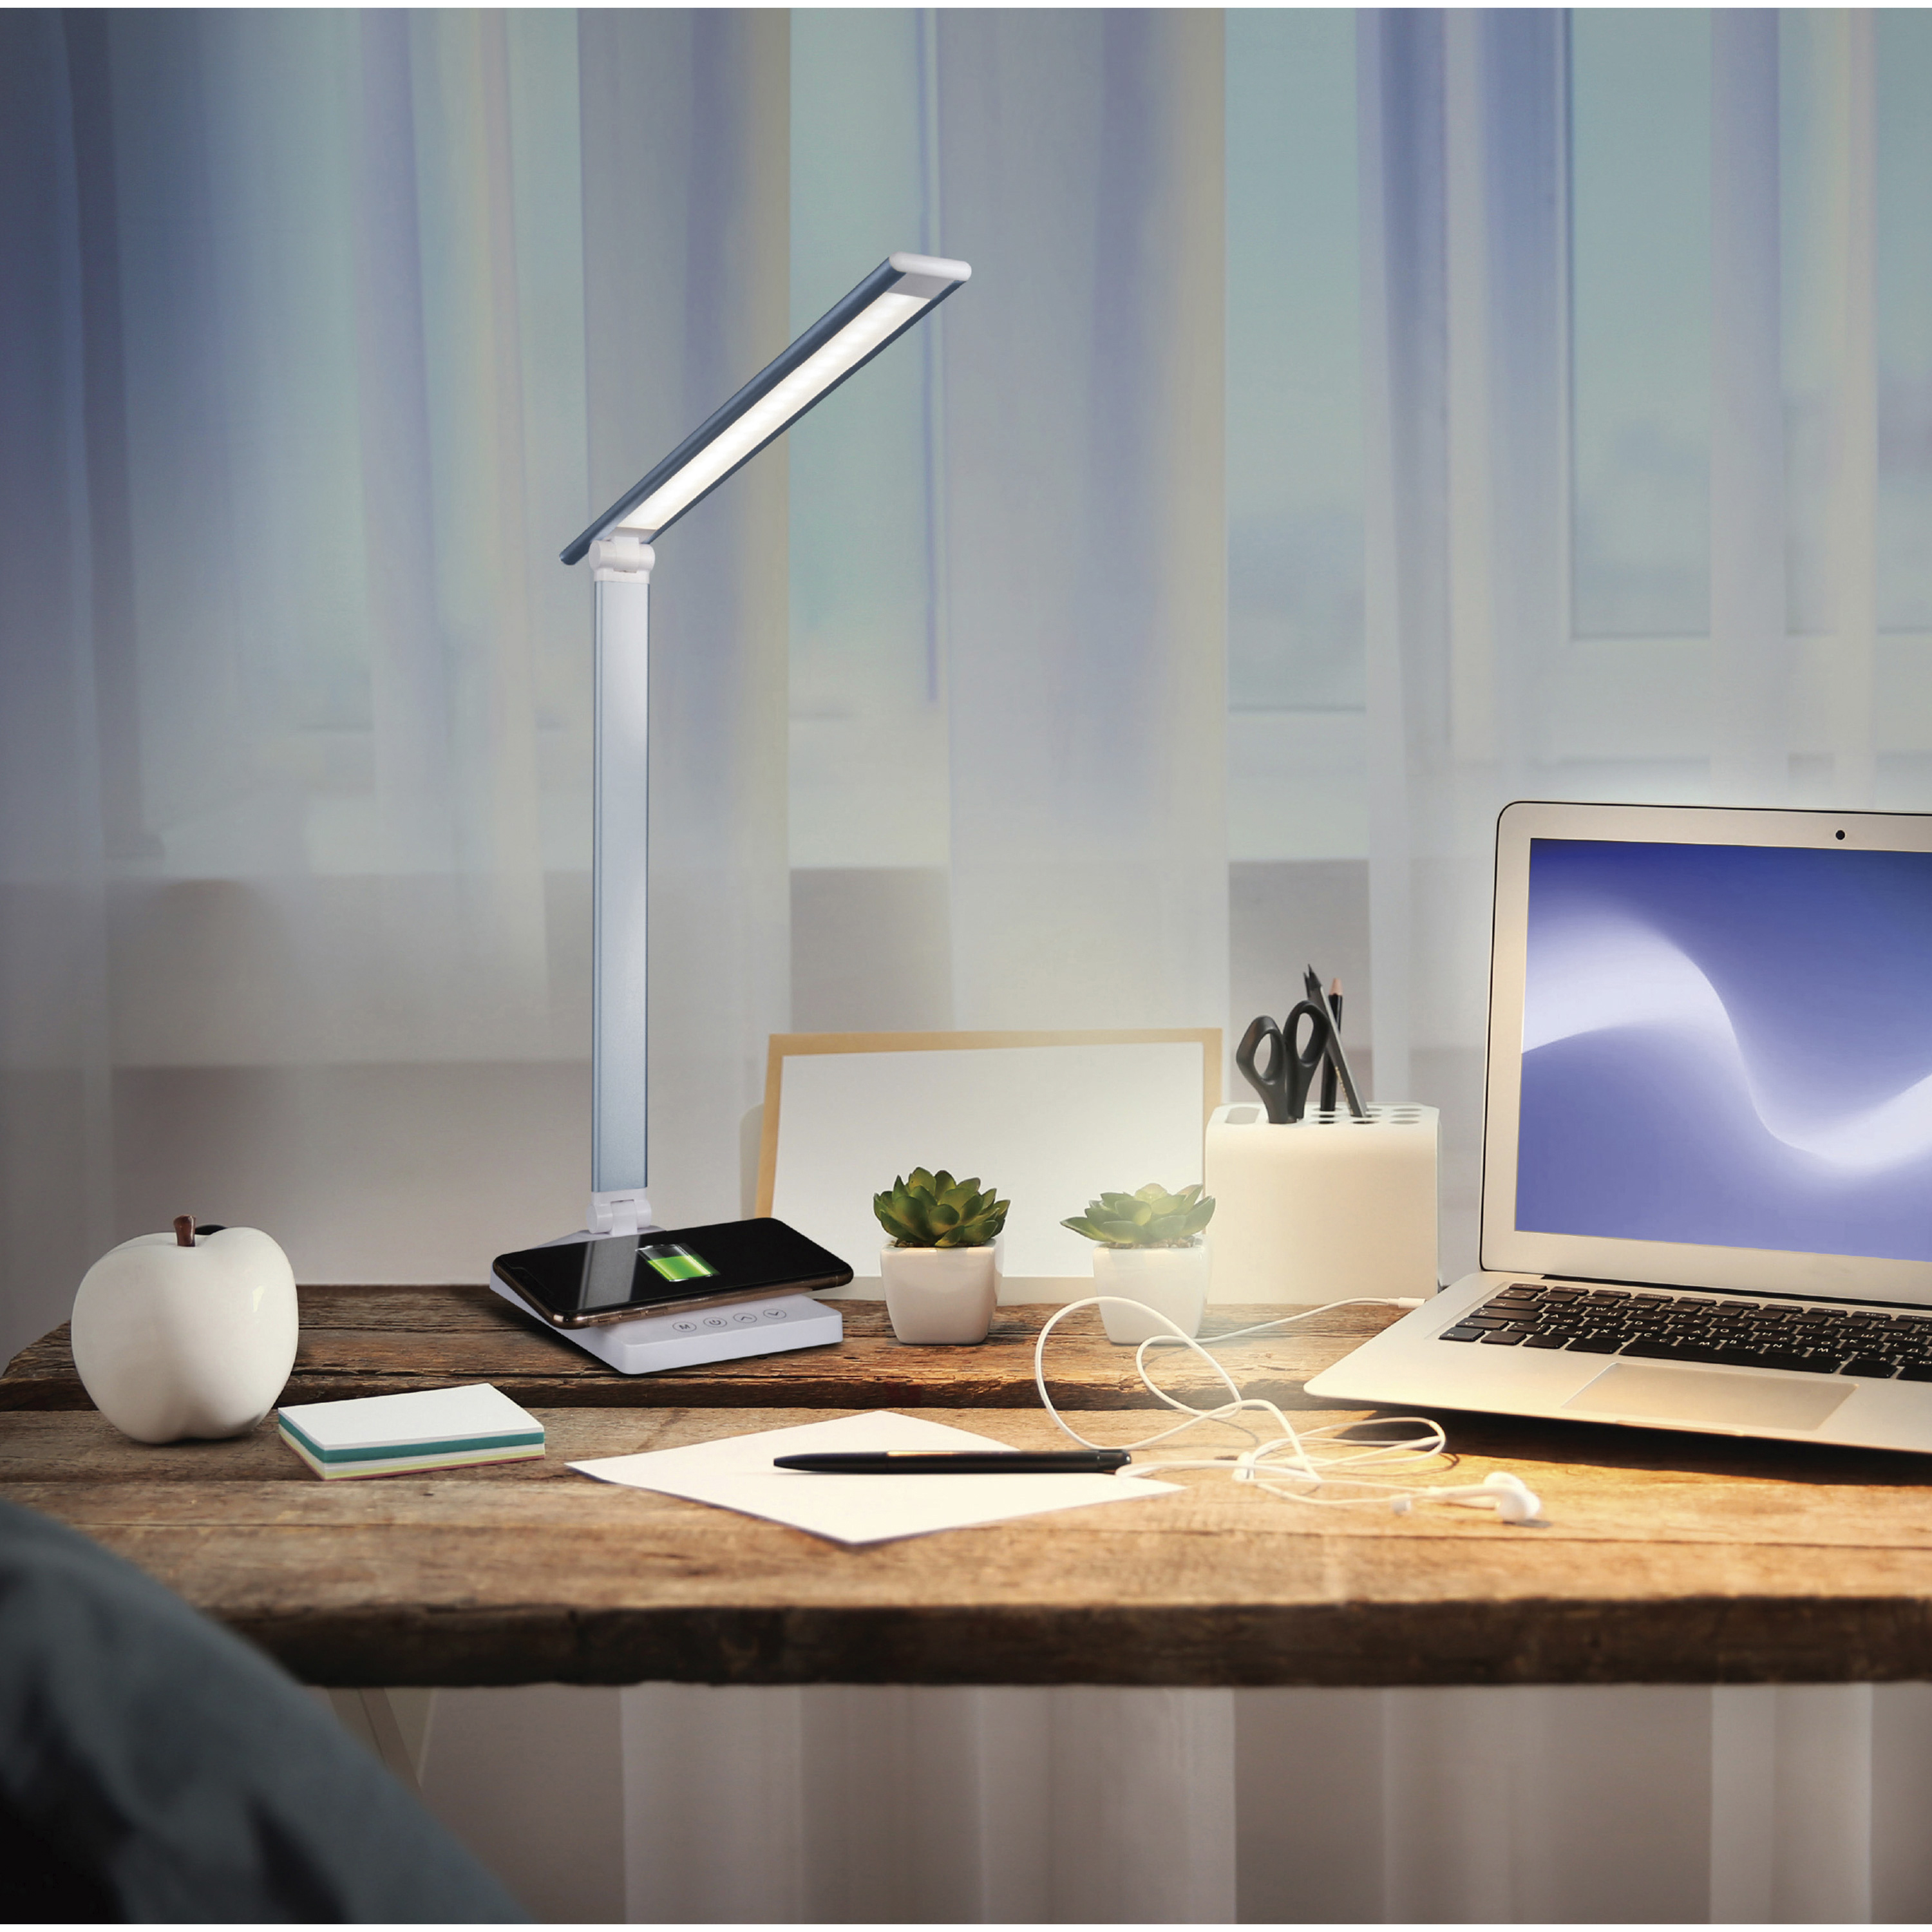 OttLite Charge Up LED Desk Lamp with Wireless Qi Charging & USB Charging  Port, with ClearSun LED Technology - Adjustable Neck, 3 Color Temperature